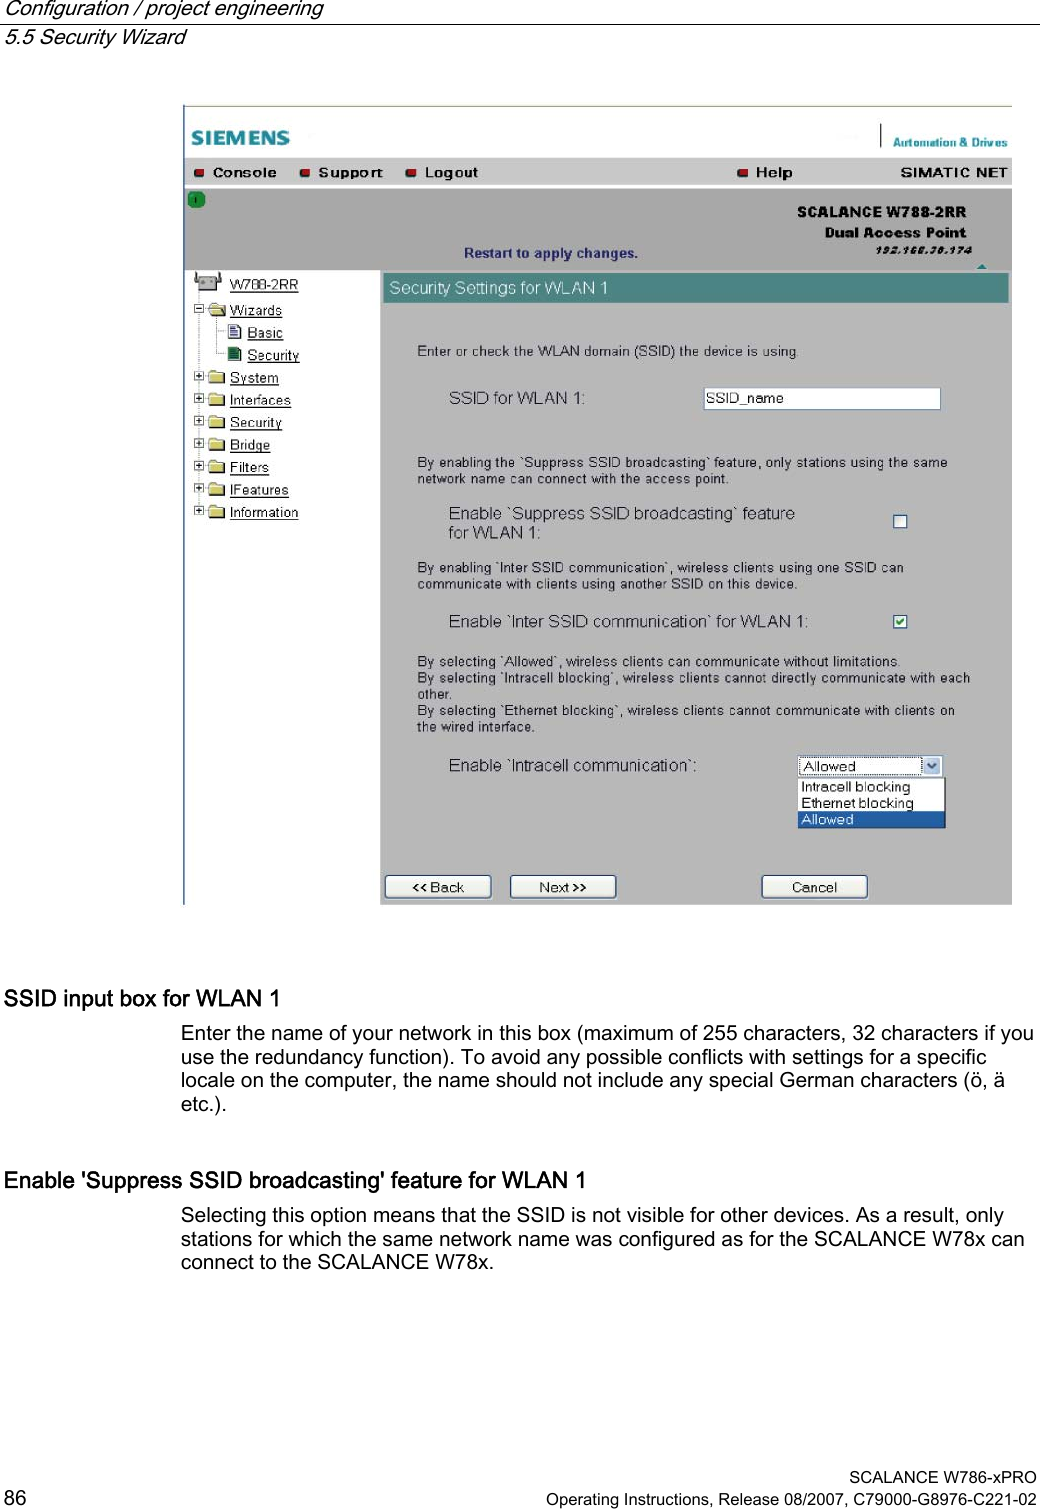 Configuration / project engineering   5.5 Security Wizard  SCALANCE W786-xPRO 86  Operating Instructions, Release 08/2007, C79000-G8976-C221-02   SSID input box for WLAN 1 Enter the name of your network in this box (maximum of 255 characters, 32 characters if you use the redundancy function). To avoid any possible conflicts with settings for a specific locale on the computer, the name should not include any special German characters (ö, ä etc.). Enable &apos;Suppress SSID broadcasting&apos; feature for WLAN 1 Selecting this option means that the SSID is not visible for other devices. As a result, only stations for which the same network name was configured as for the SCALANCE W78x can connect to the SCALANCE W78x. 